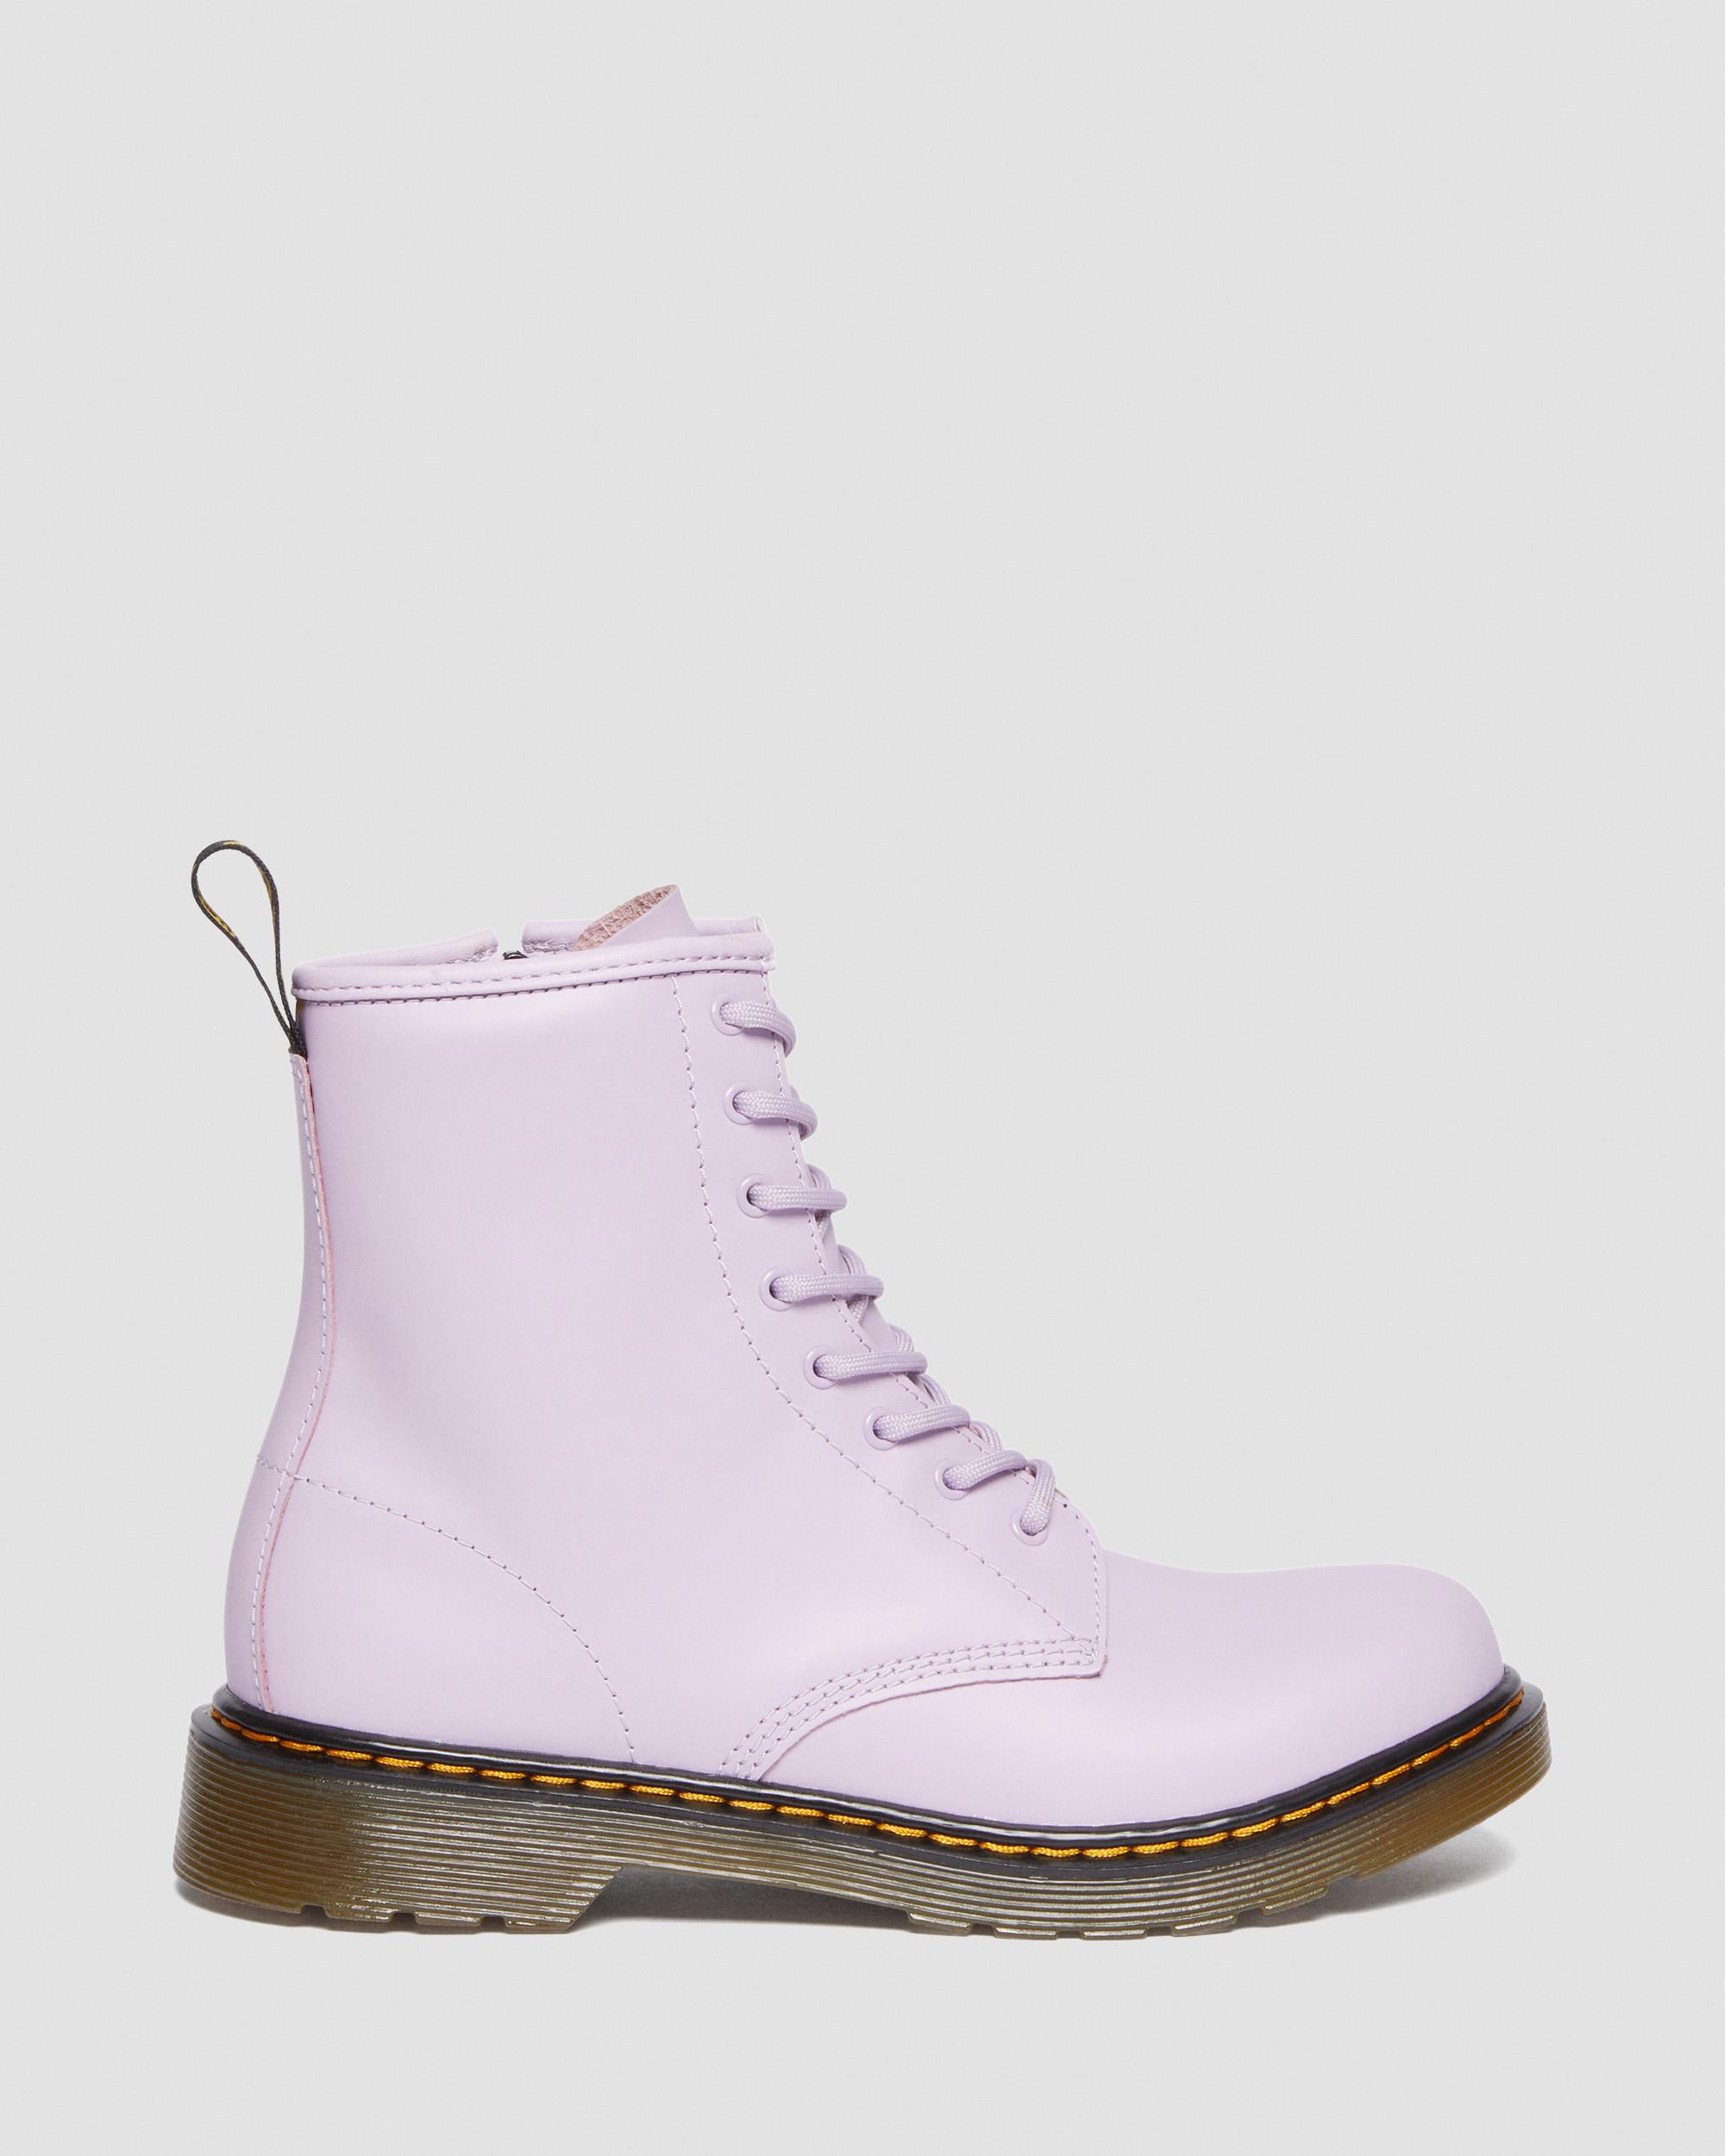 Youth Up Martens | in 1460 Boots Lace Dr. Romario Lilac Leather